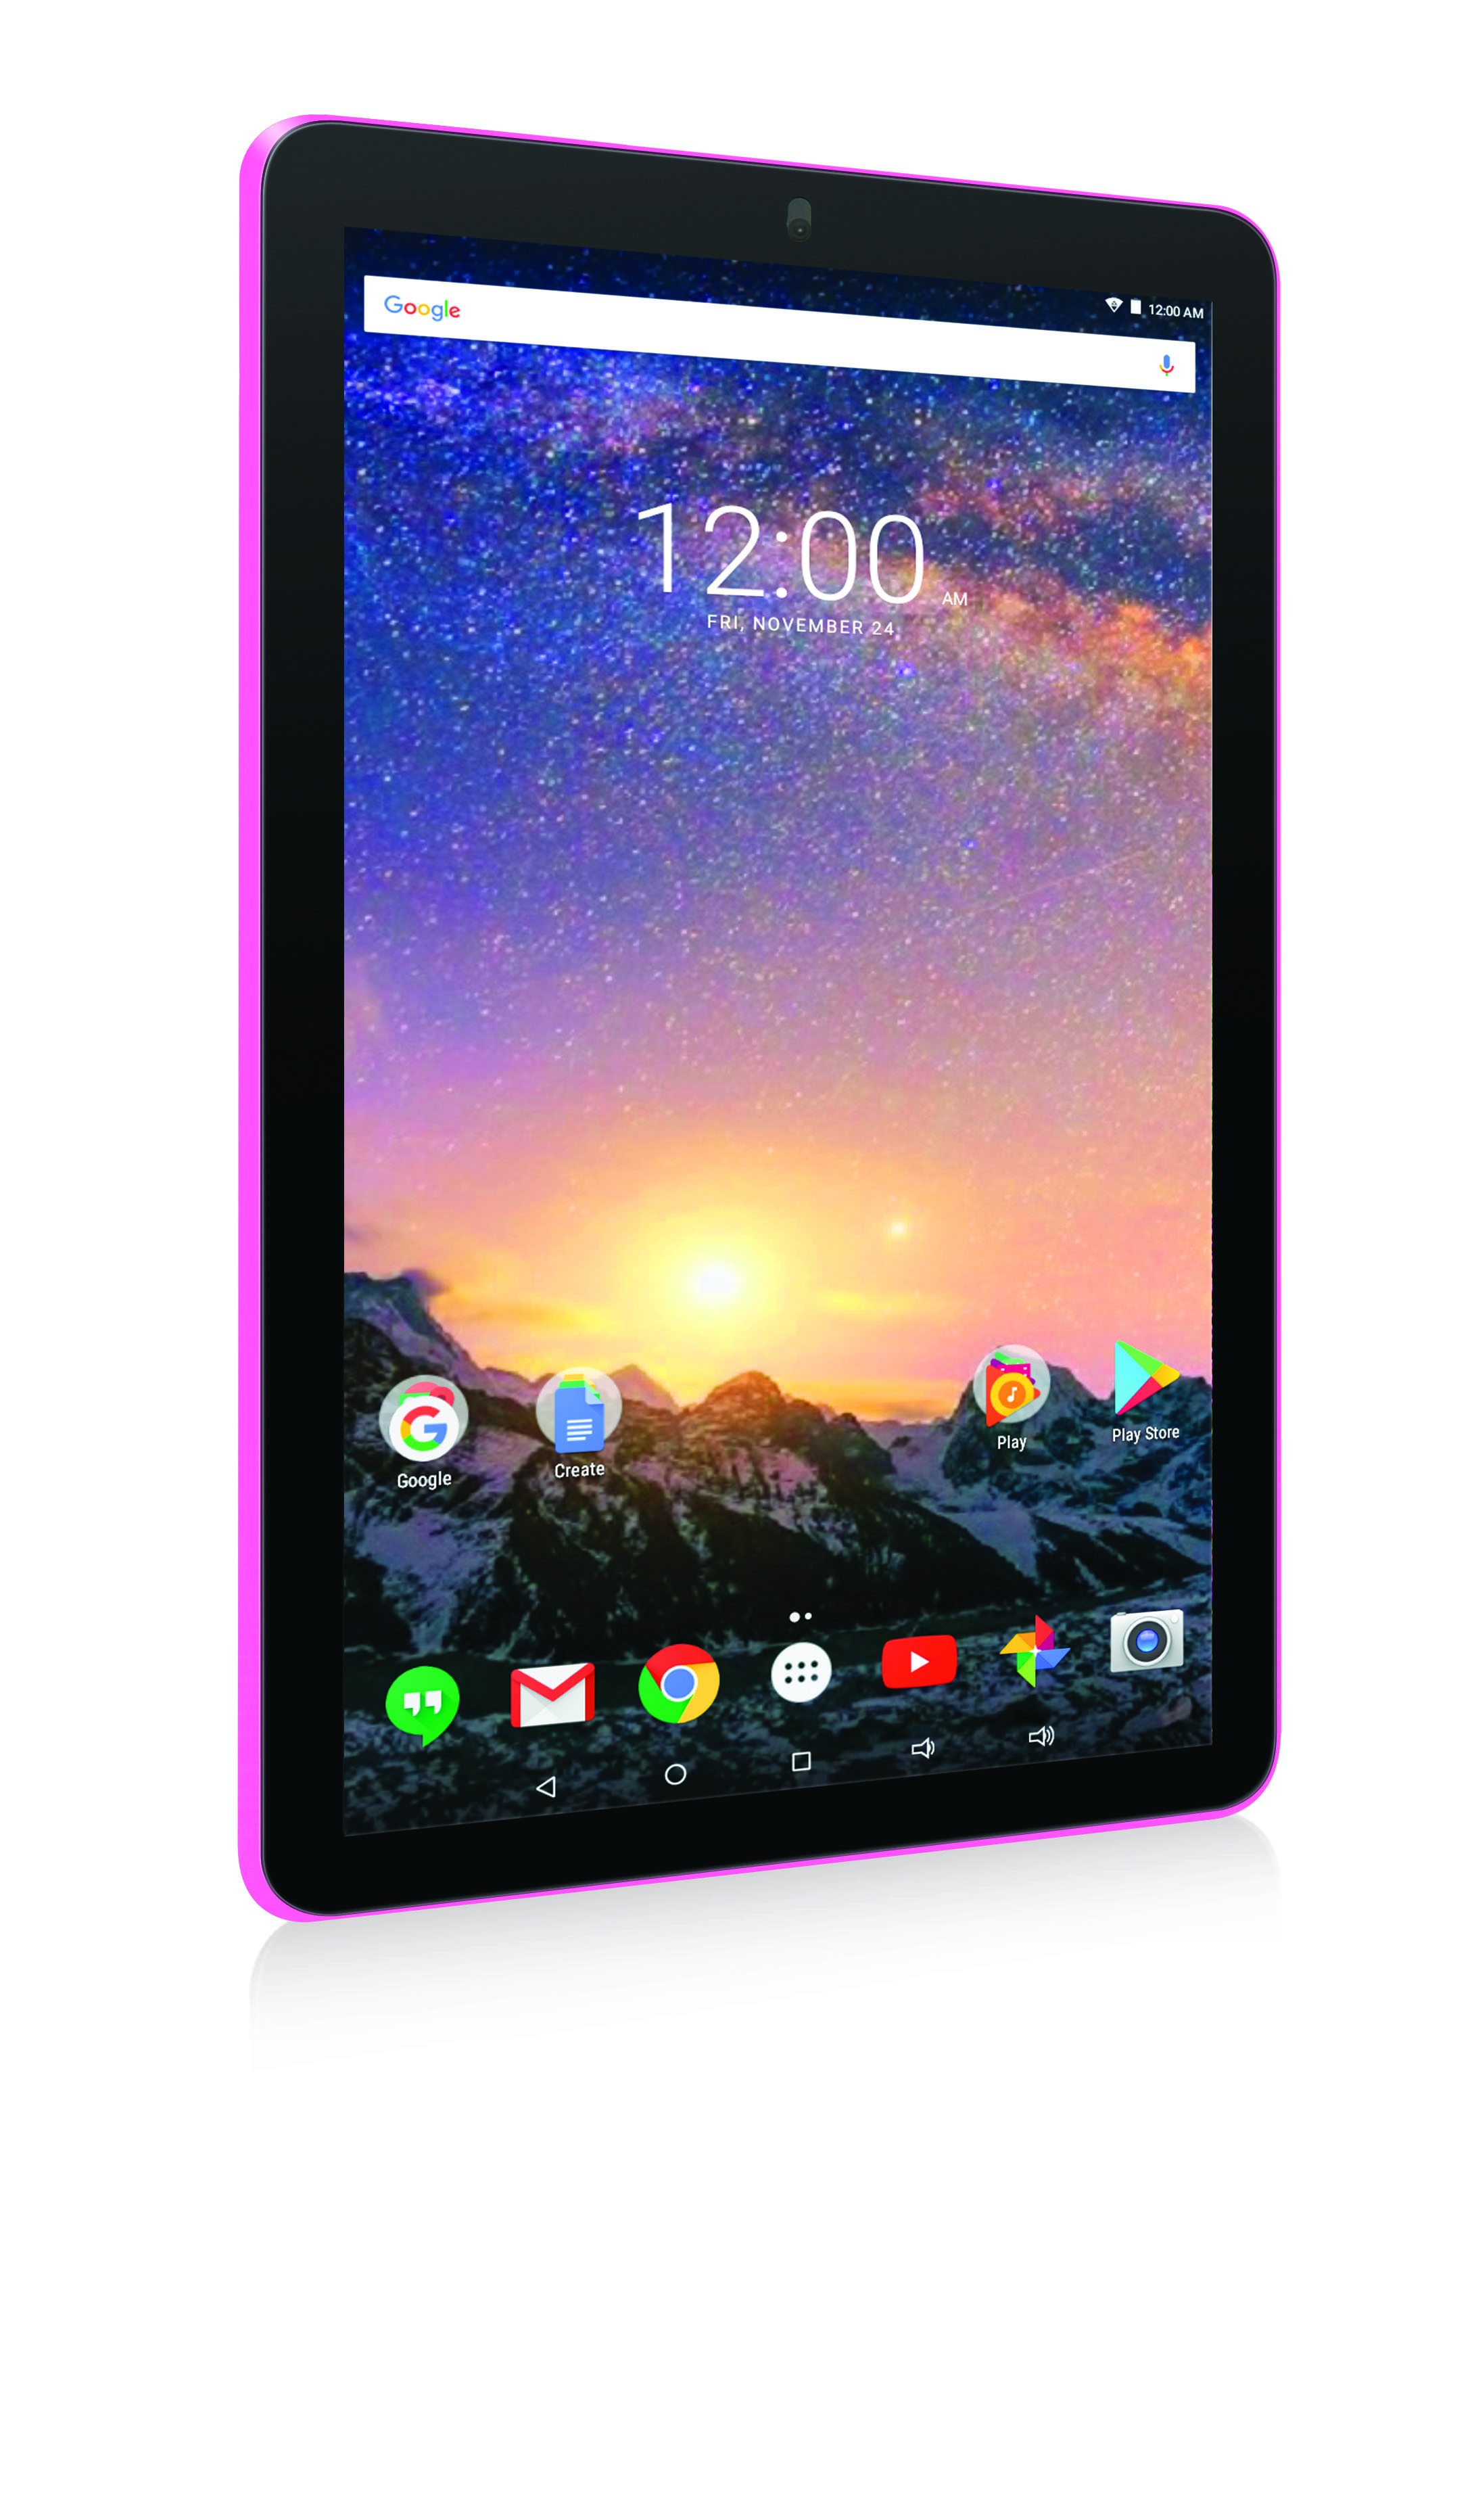 RCA Galileo Pro 11.5" 32GB 2-in-1 Tablet with Keyboard Case Android OS, Pink (Google Classroom Ready) - image 4 of 4